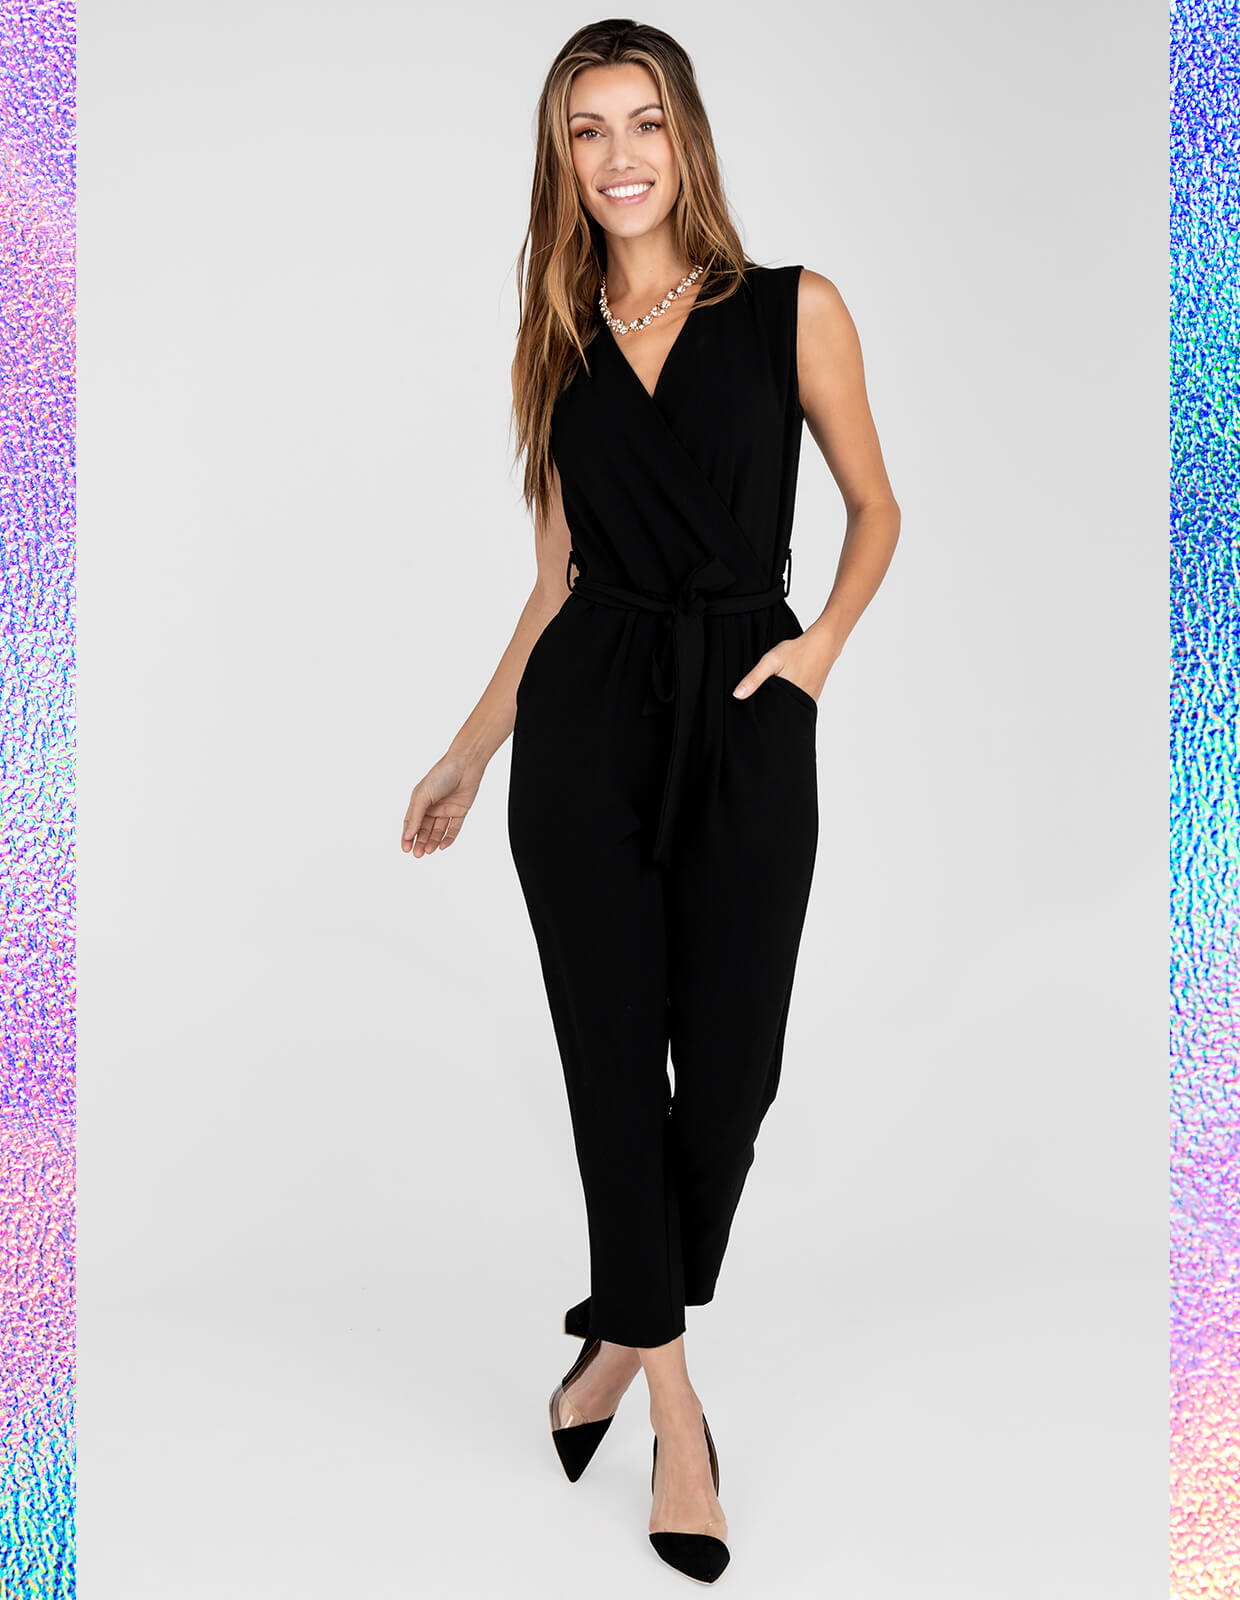 Silver Icing Name It to Win It: Black Jumpsuit